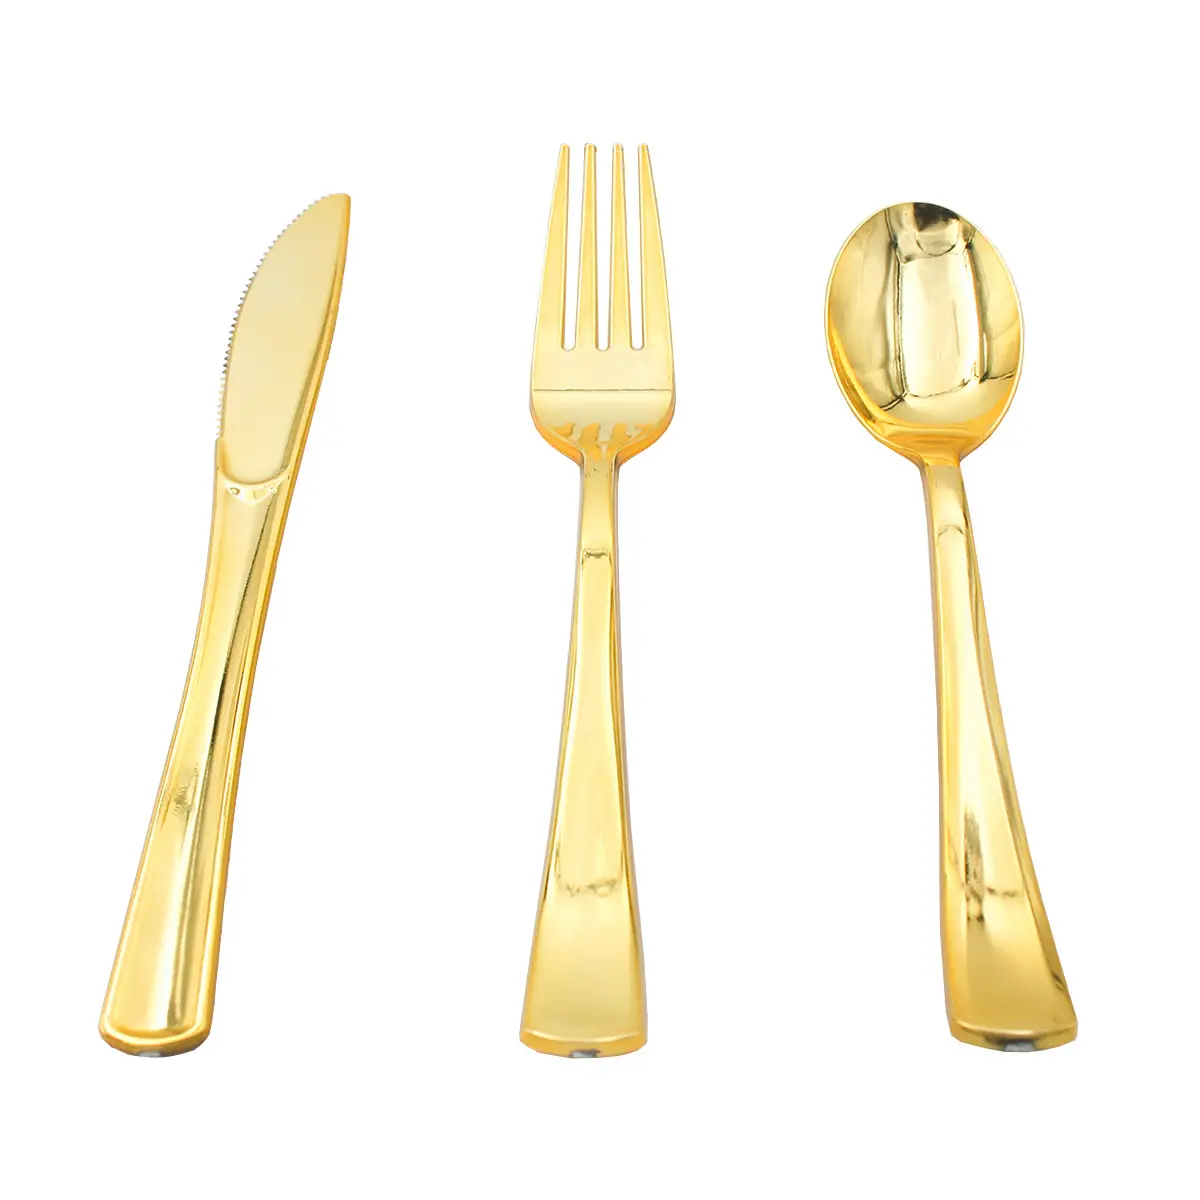 Promotional Disposable Cutlery Set UV Electroplated Plastic Knife Fork Spoon for Food for Birthday & Wedding Parties